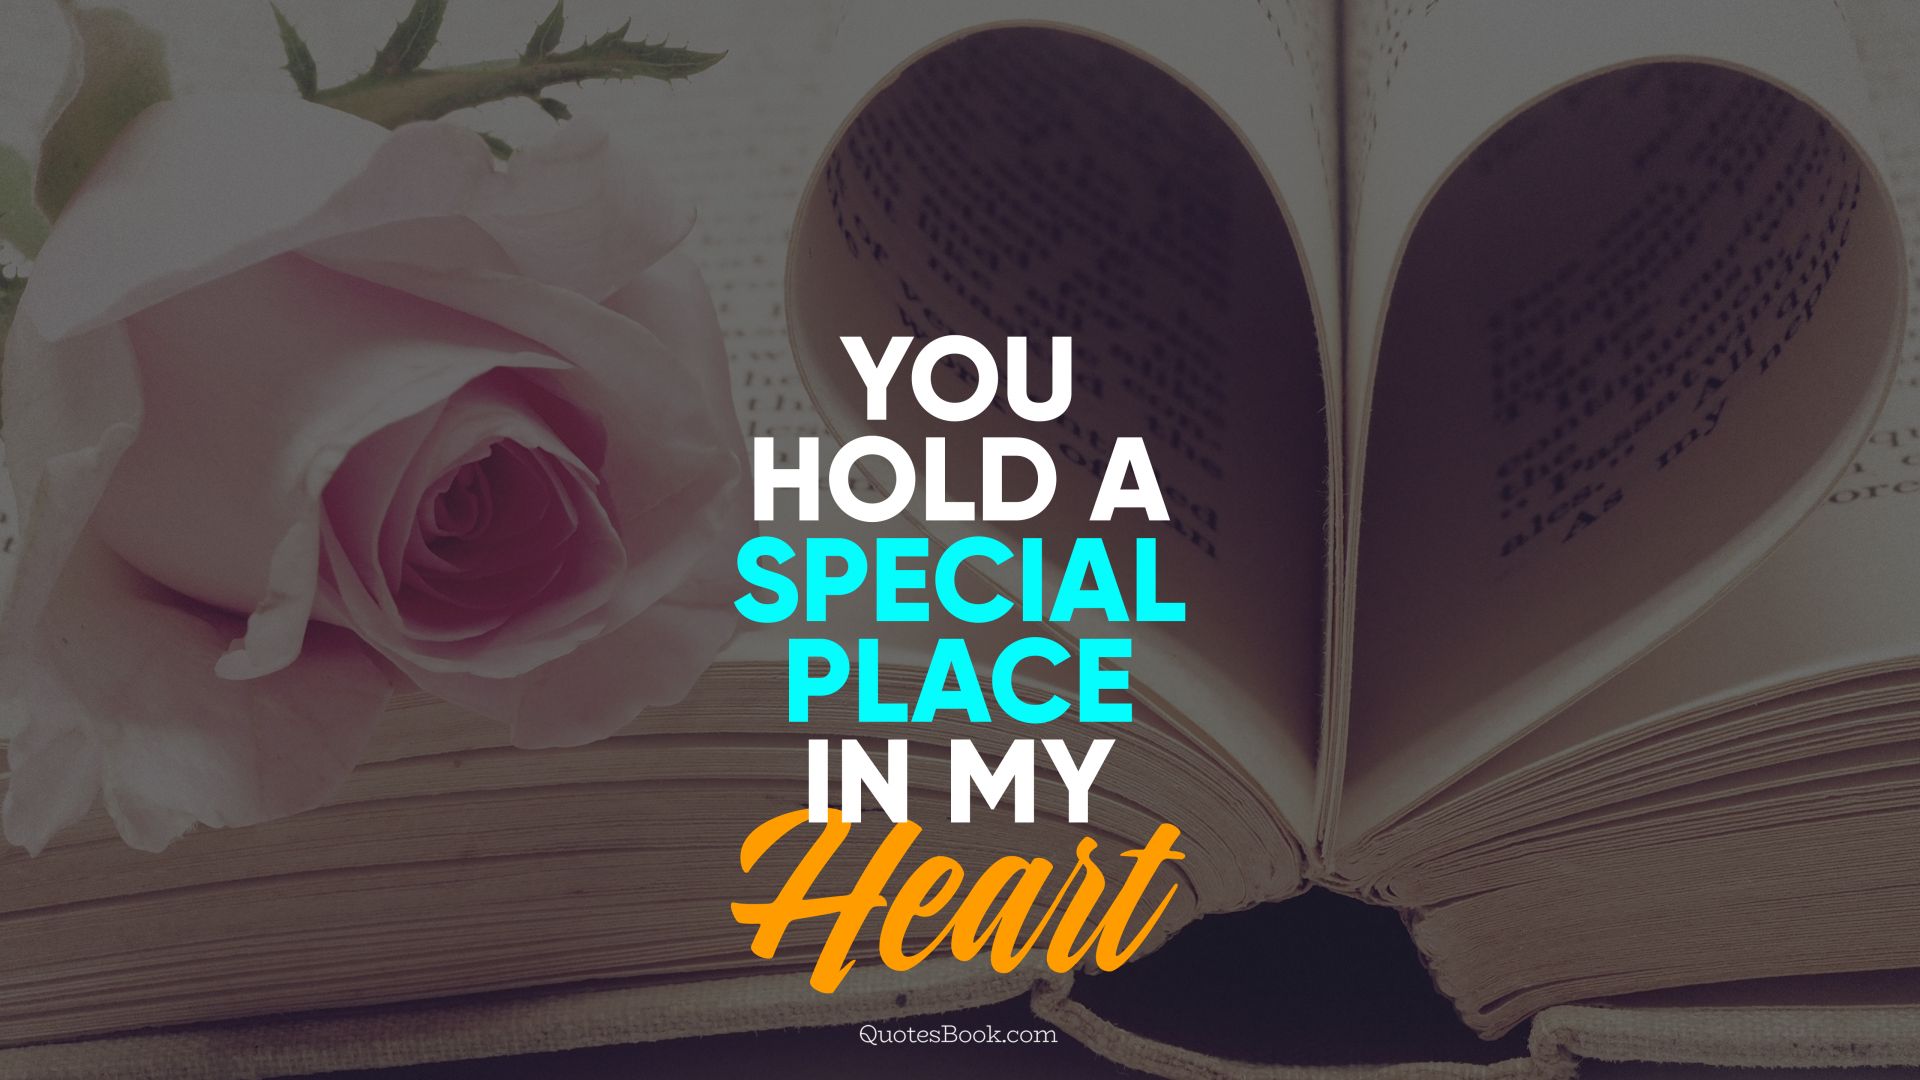 You hold a special place in my heart - QuotesBook